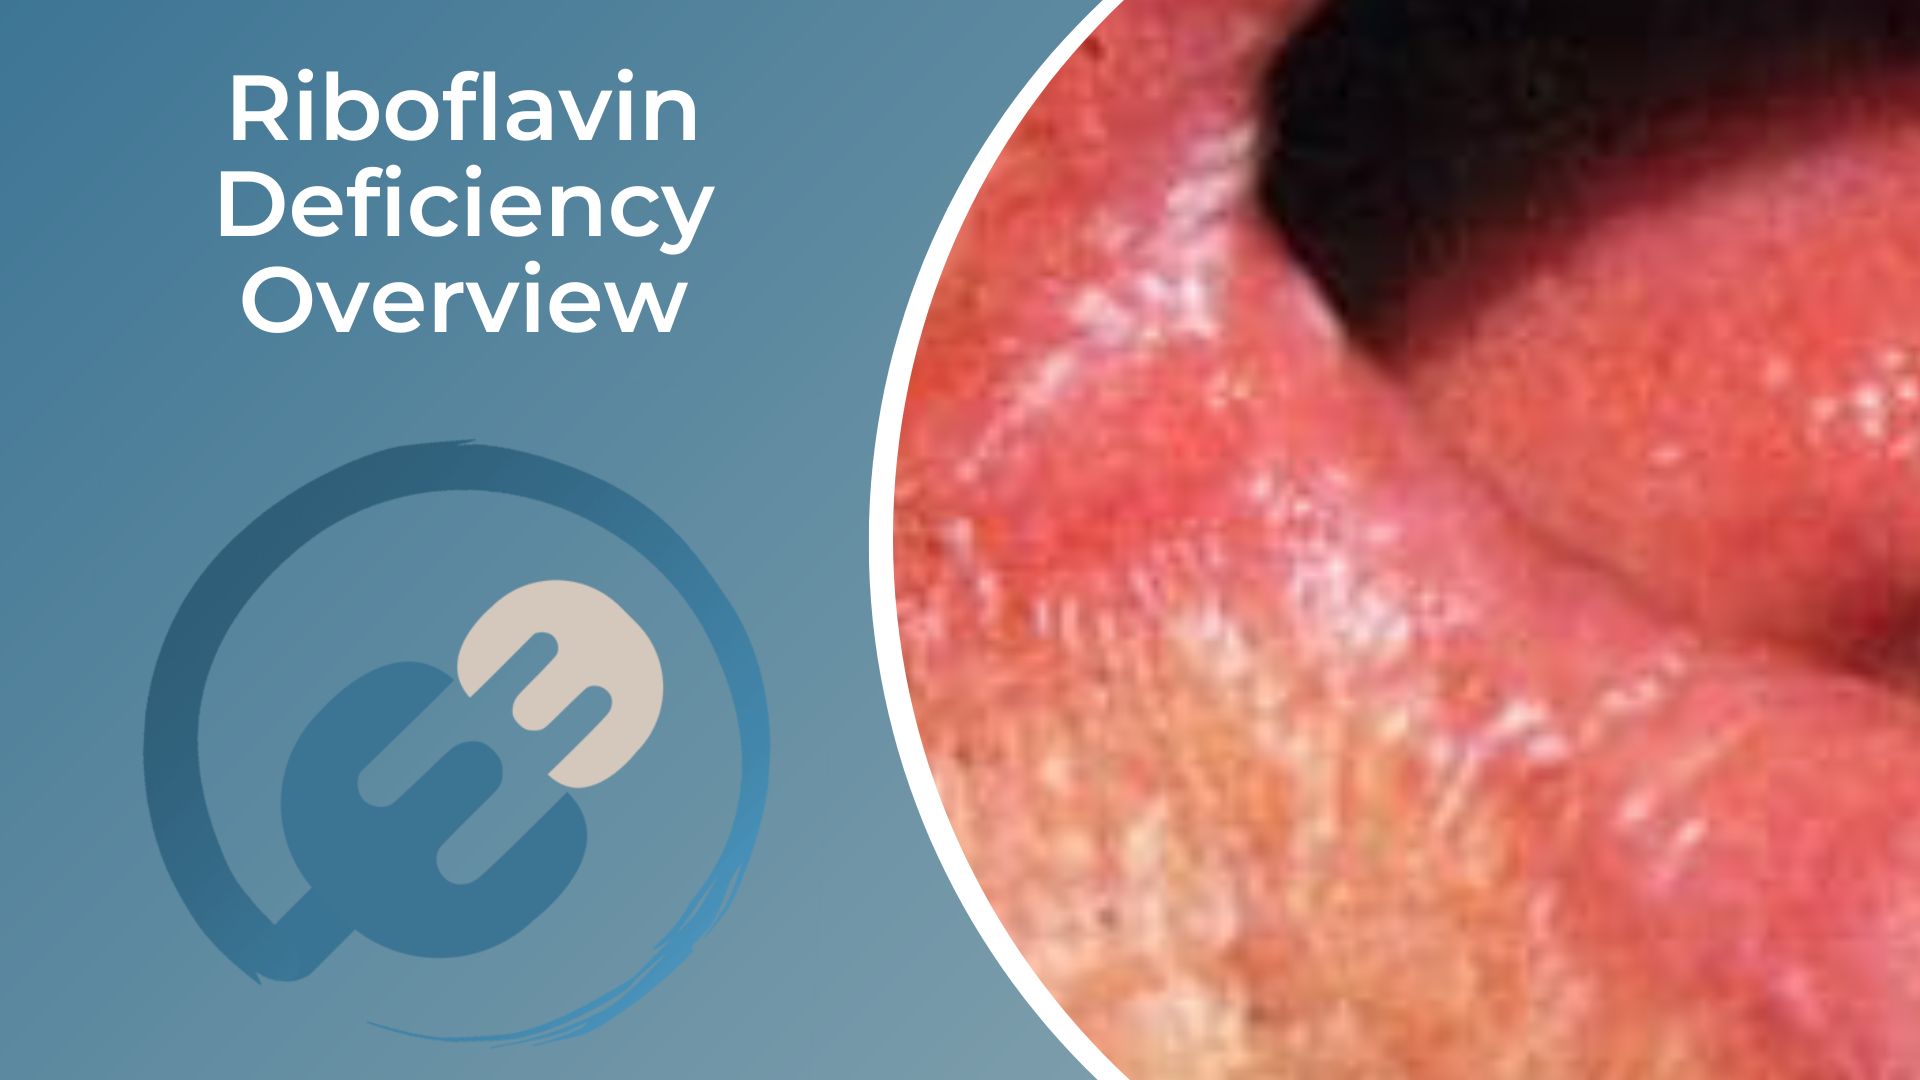 Riboflavin Deficiency Overview